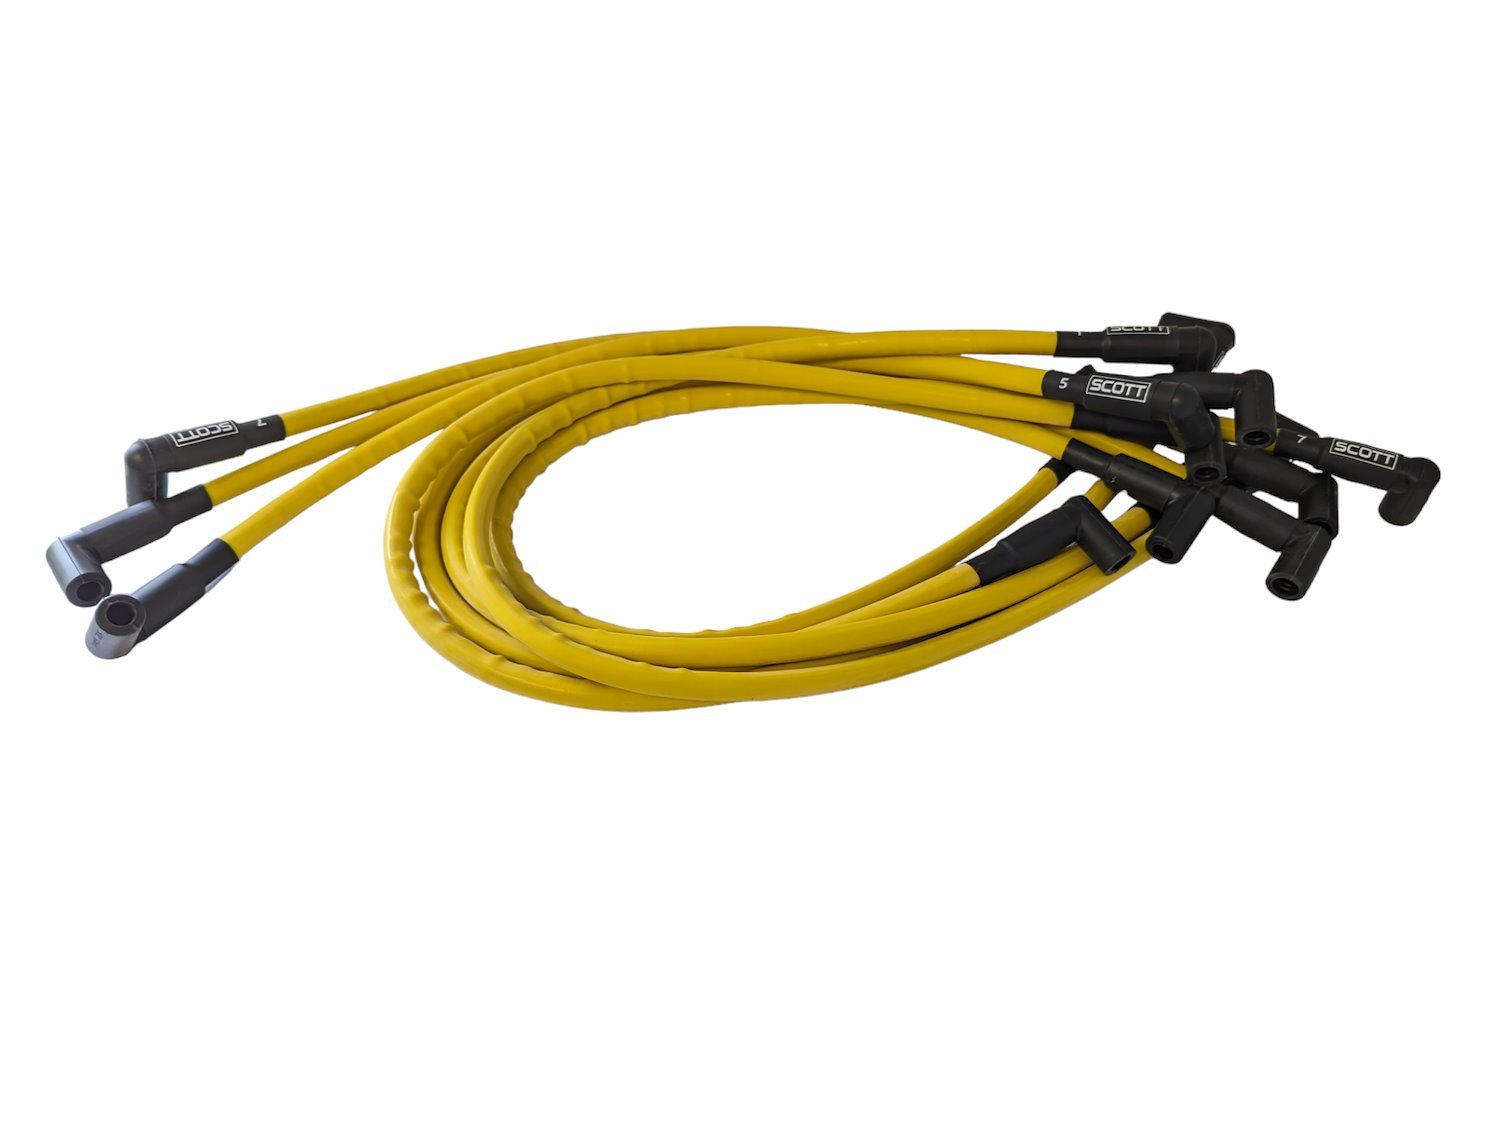 SPW-CH-437-7 High-Performance Silicone-Sleeved Spark Plug Wire Set for Small Block Chevy, Over & Under [Yellow]